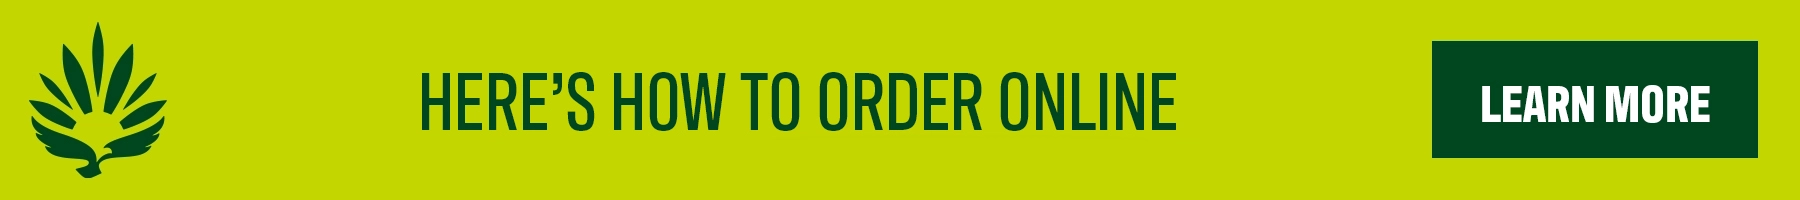 RISE-Dispensary-how-to-order-online